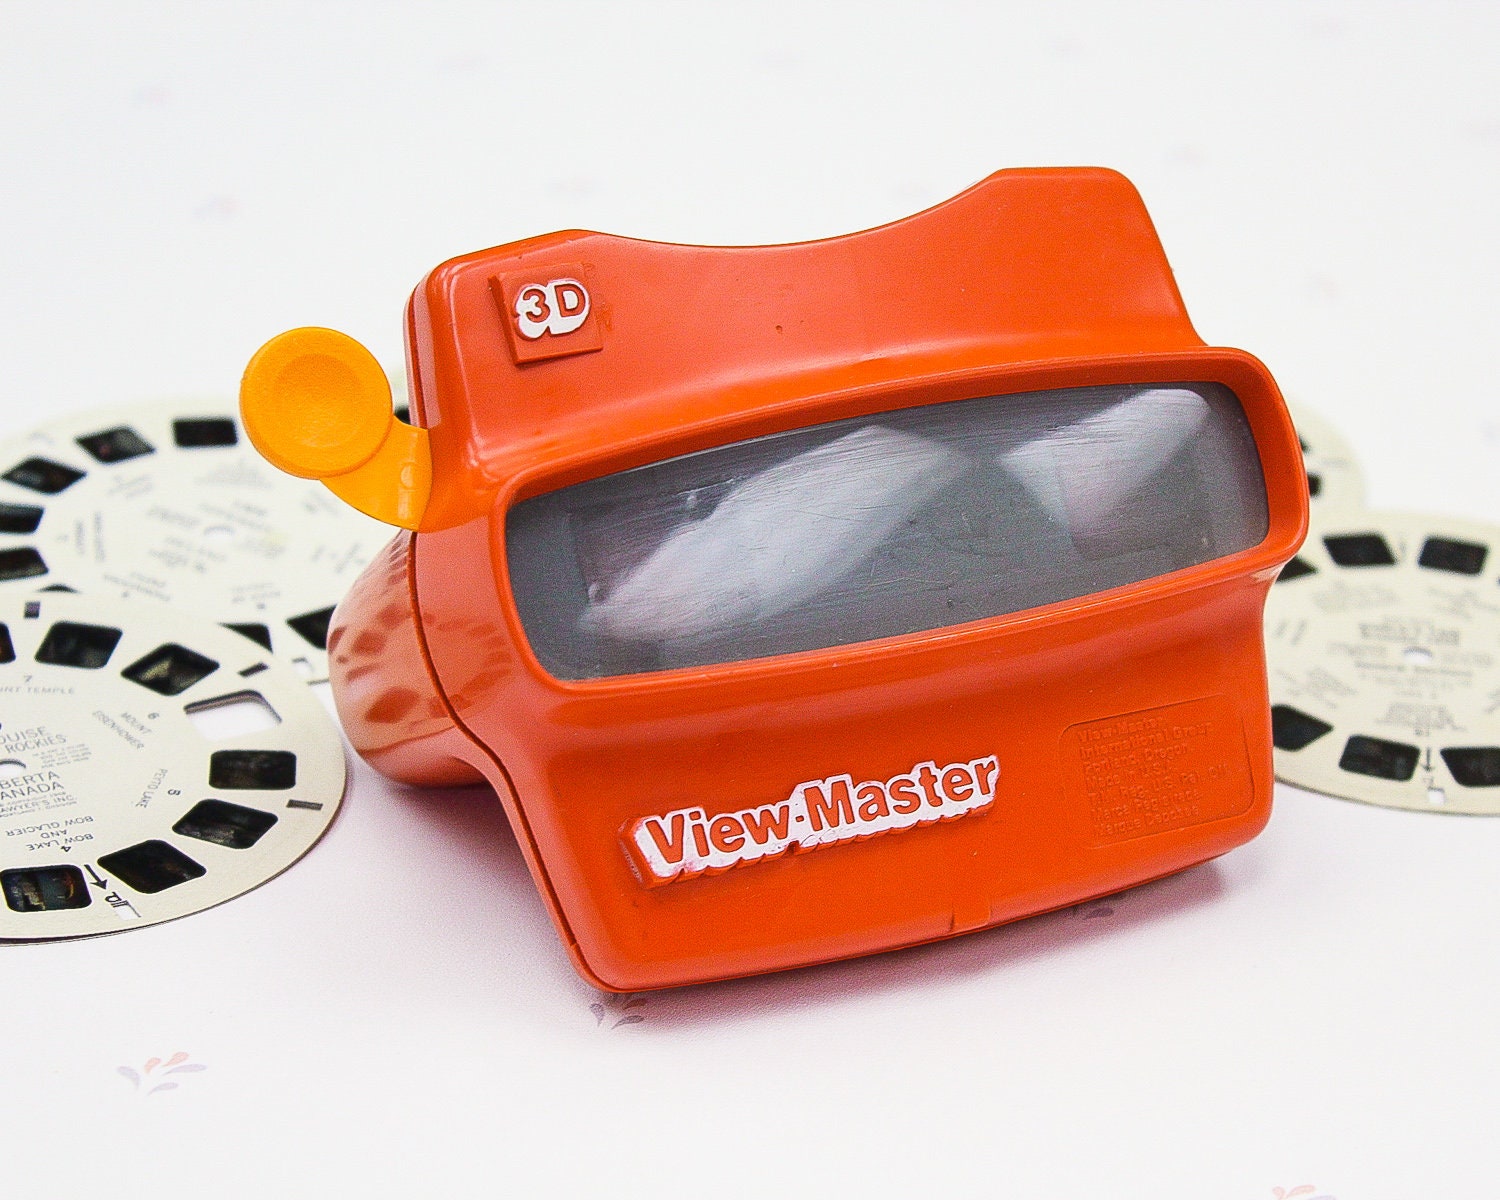 3D View Master & Film Reels, Vintage Viewfinder Toy for Adults, Kids Toys,  Collectible Film Slides, Scenic Film View Finder, Collectible Toy 